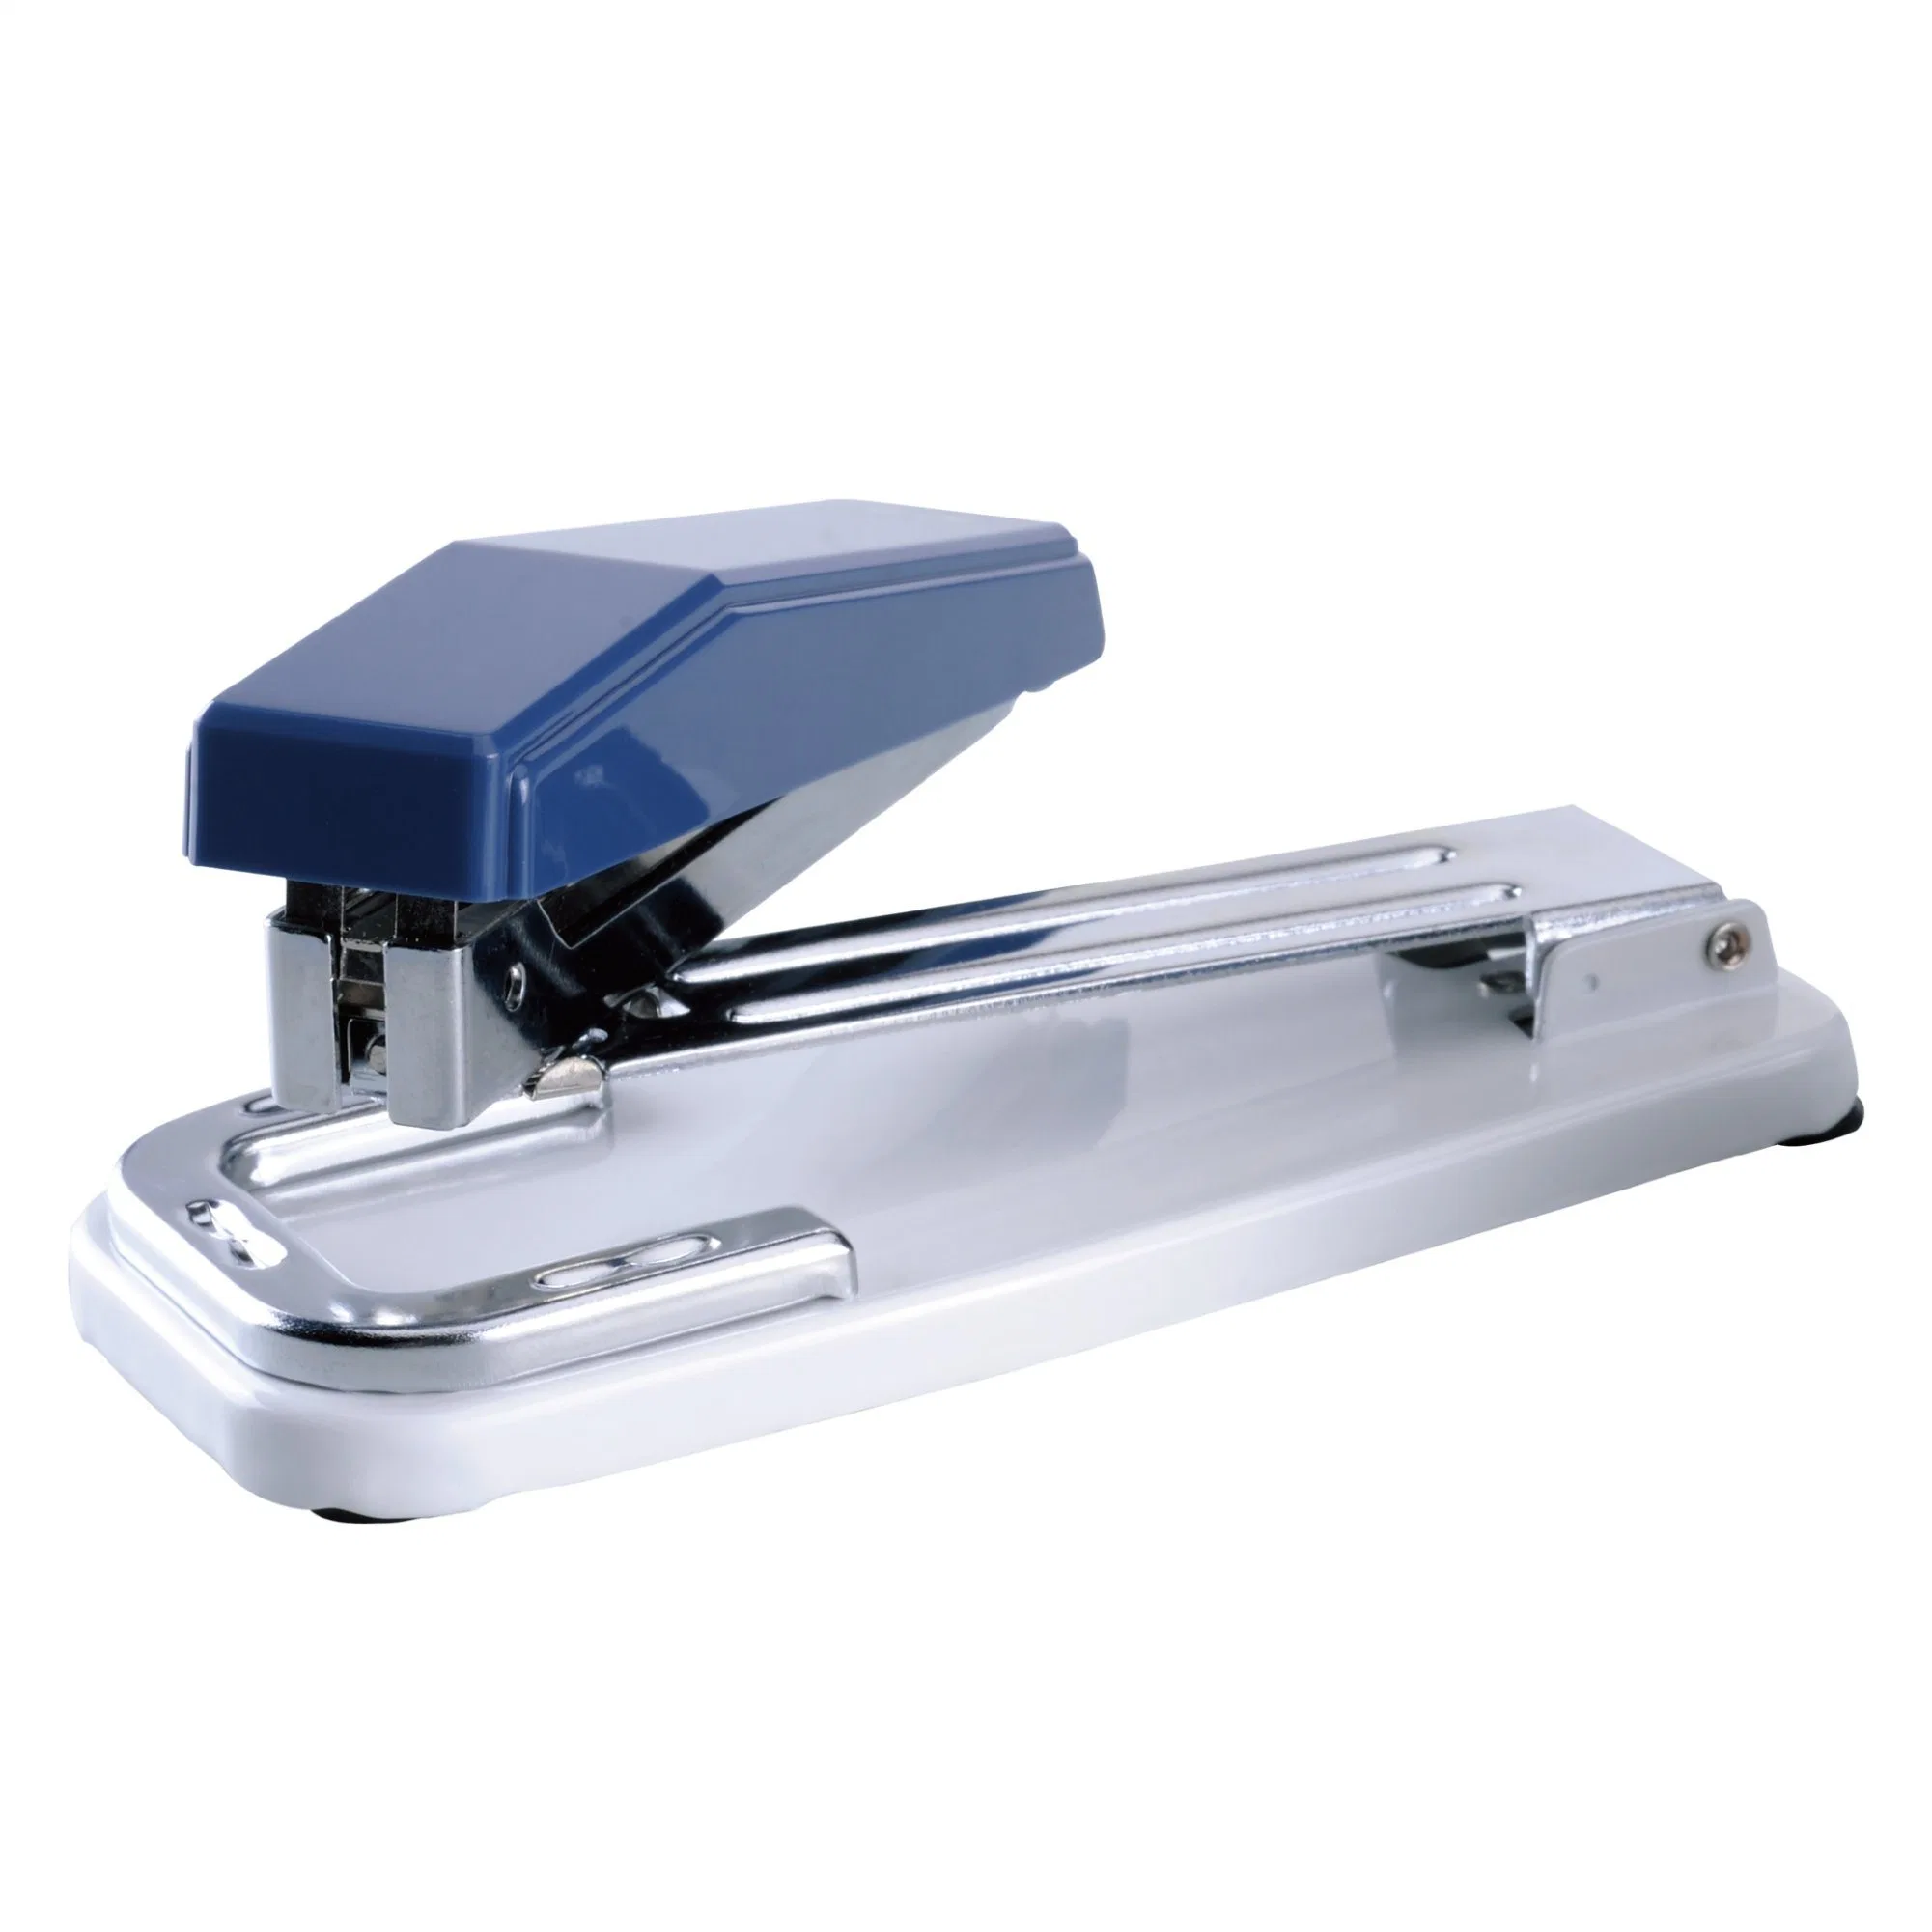 Metal Durable Fashion Rotary Stapler School Documents Stationery Supply Office Utility Accessories